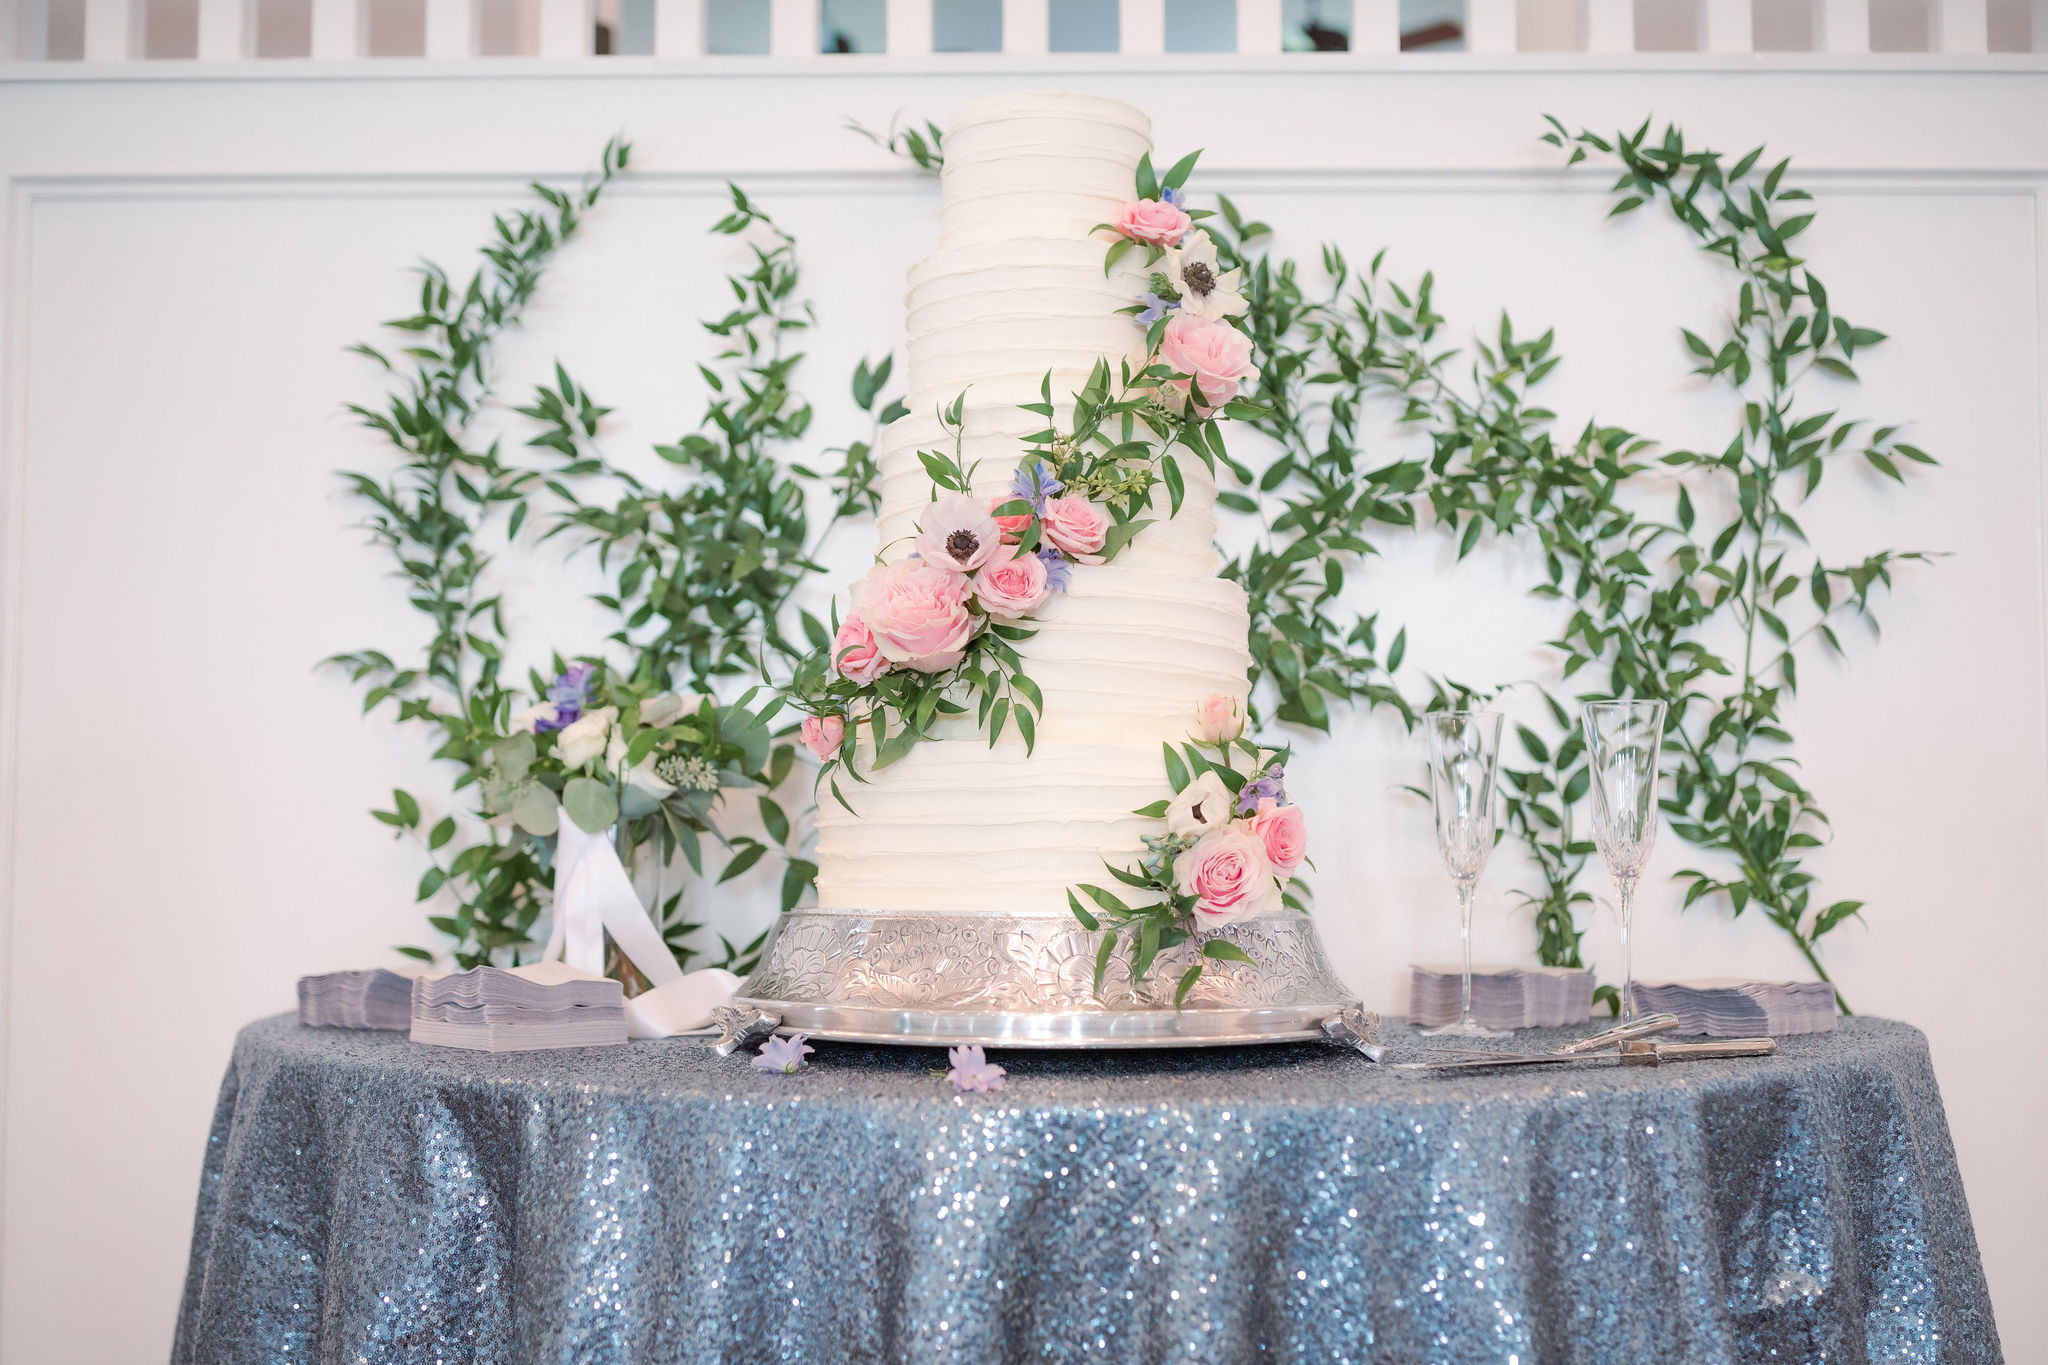 The wedding cake with pink flowers as decoration.